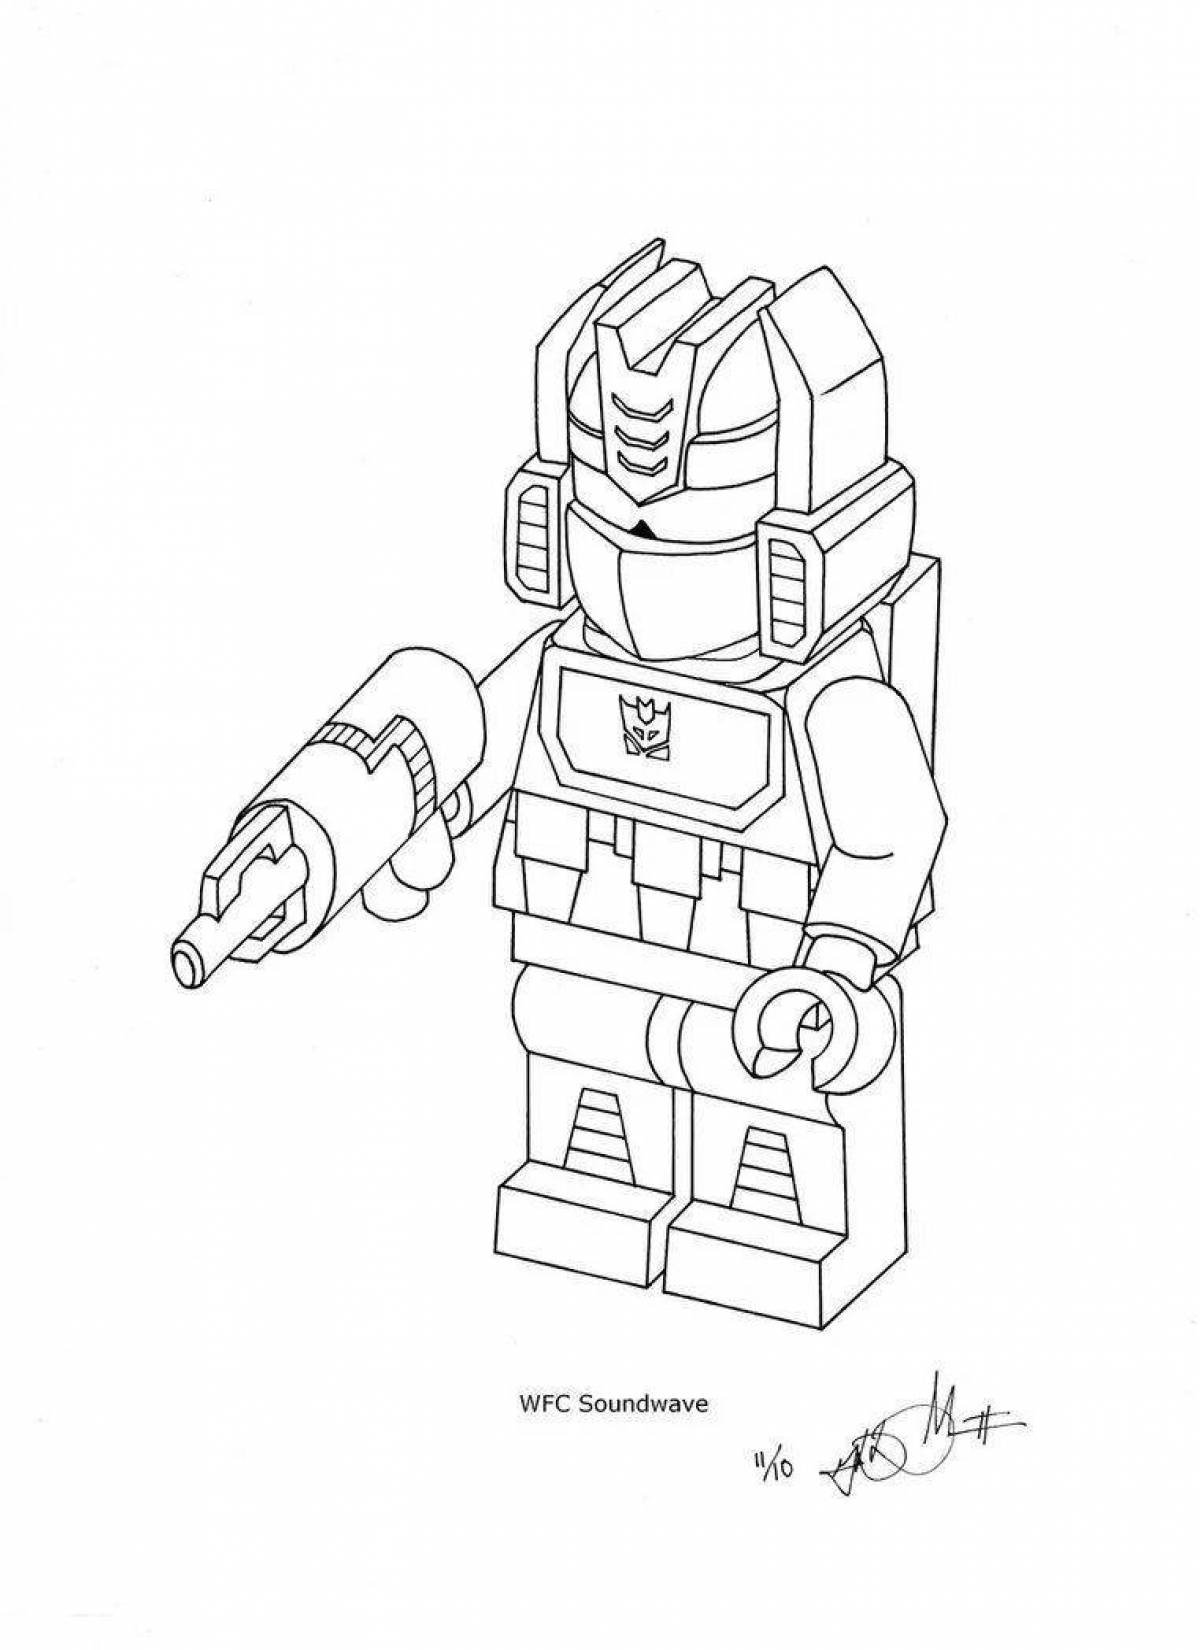 Great lego robot coloring page